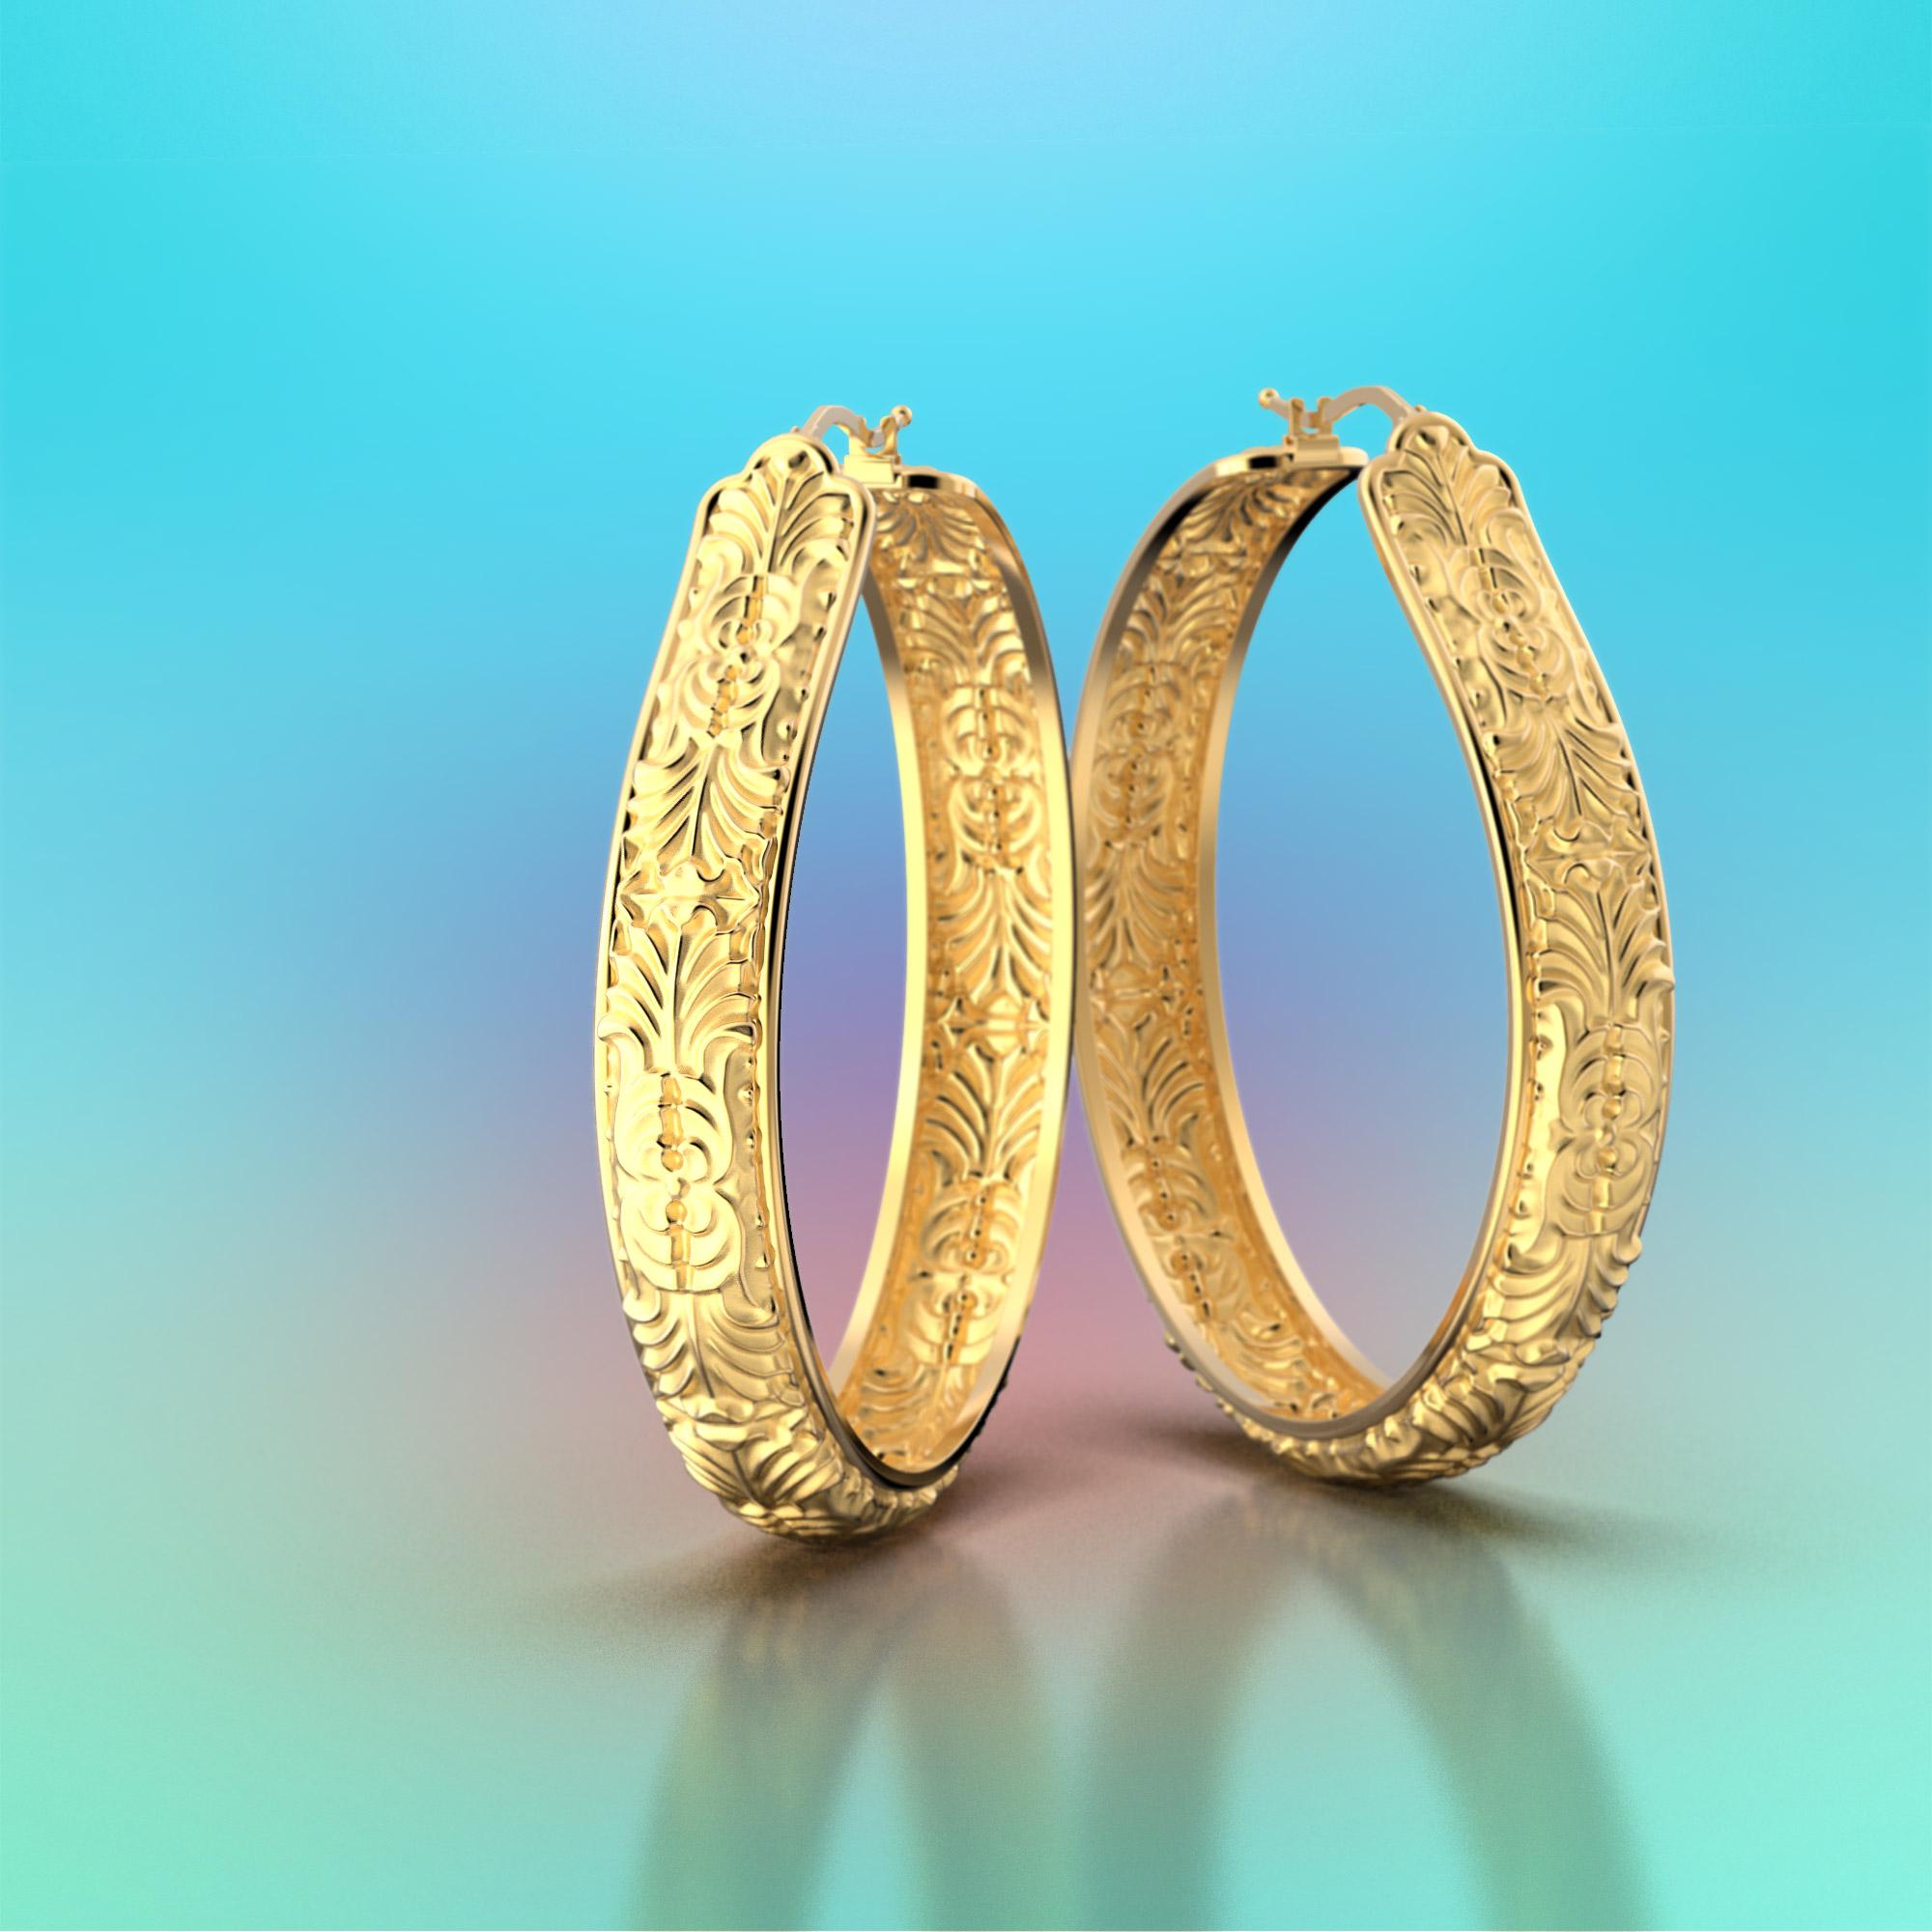 Made to Order Stunning 14k Gold Hoop Earrings.
Size : 51 mm diameter x 9 mm large
Introducing a true embodiment of opulence and elegance – the Made in Italy Acanthus Leaf Hoop Earrings, available exclusively in exquisite 18k and 14k solid gold.